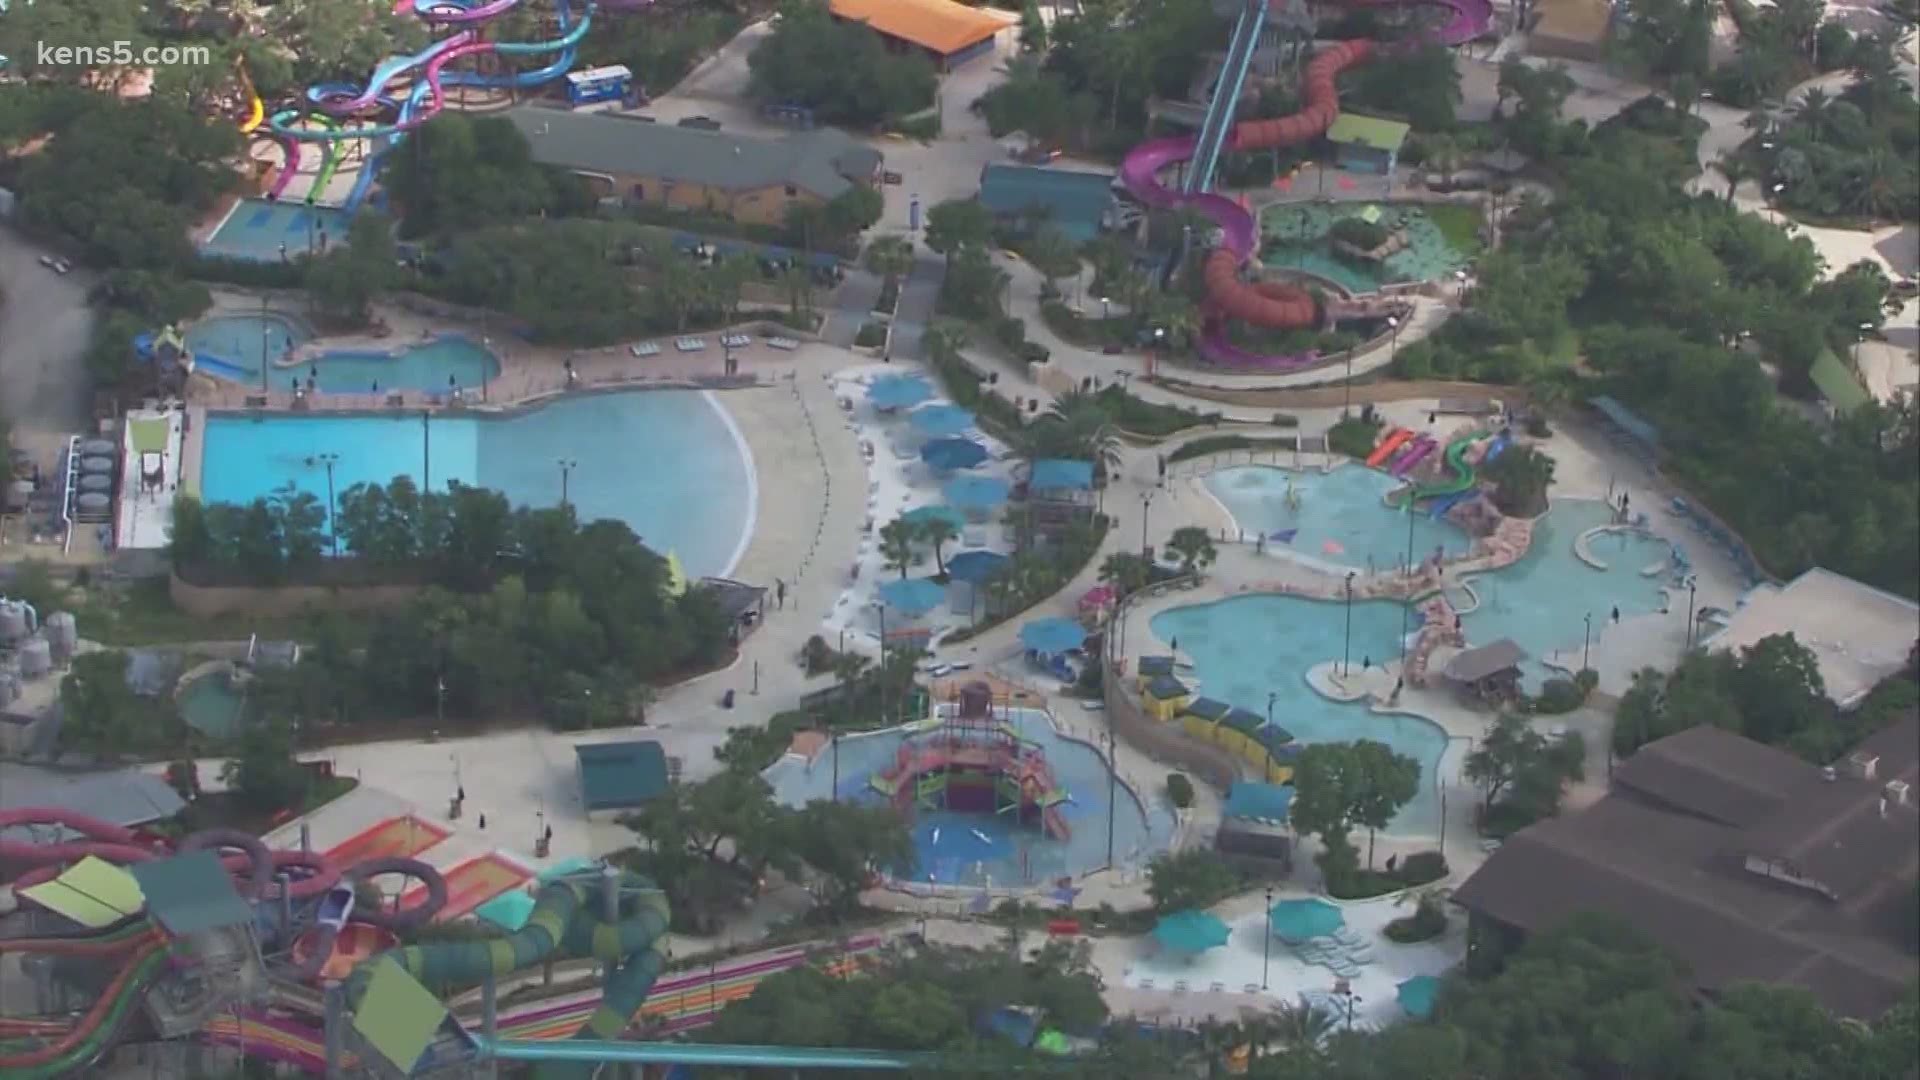 Aquatica Reopens For The Summer With New Reservation System Kens5 Com